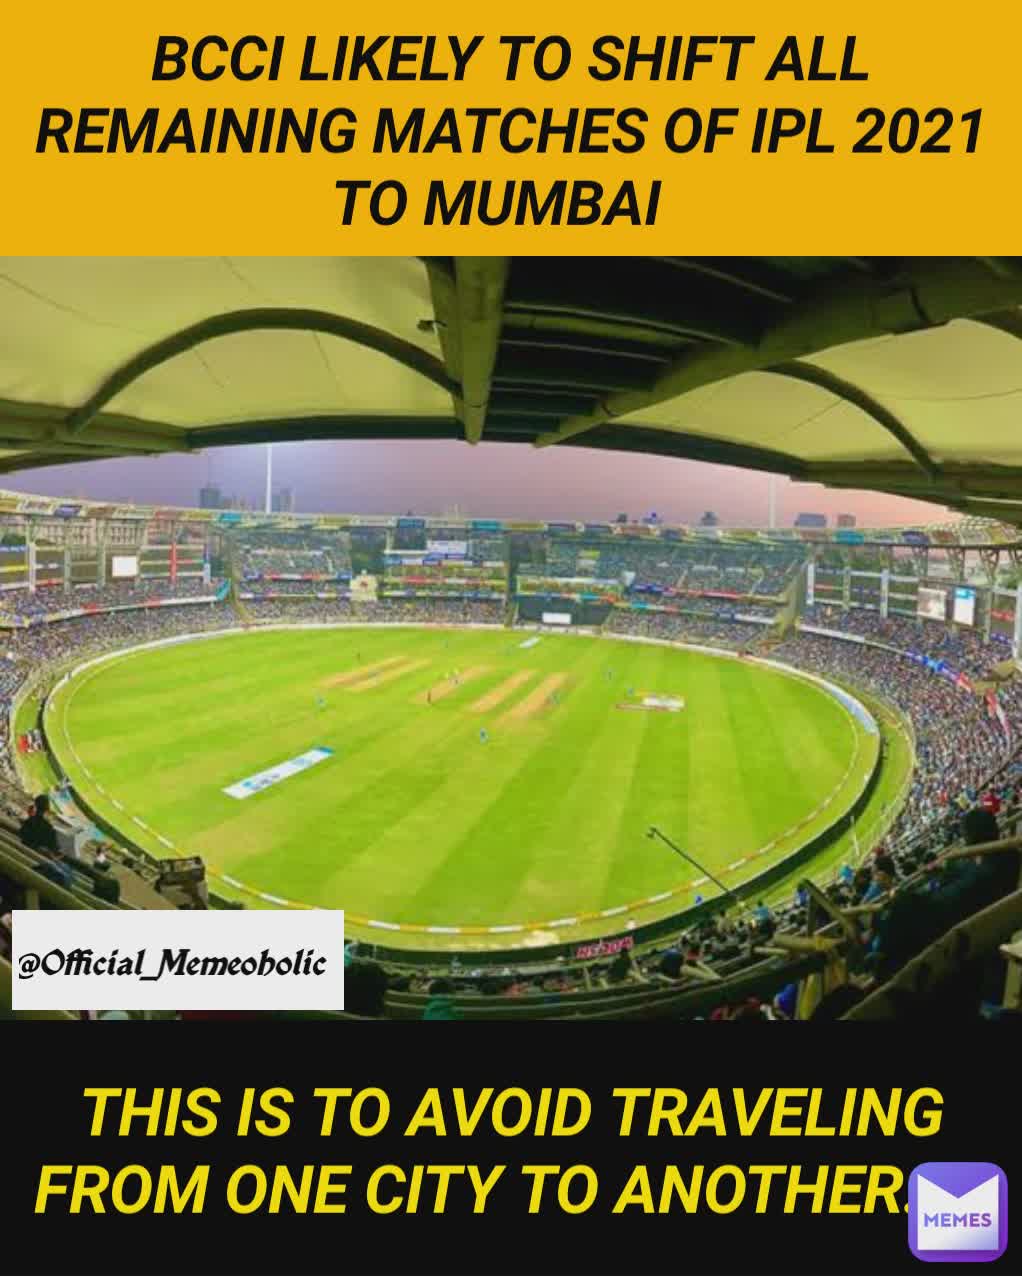 BCCI LIKELY TO SHIFT ALL REMAINING MATCHES OF IPL 2021 TO MUMBAI THIS IS TO AVOID TRAVELING FROM ONE CITY TO ANOTHER... @Official_Memeoholic